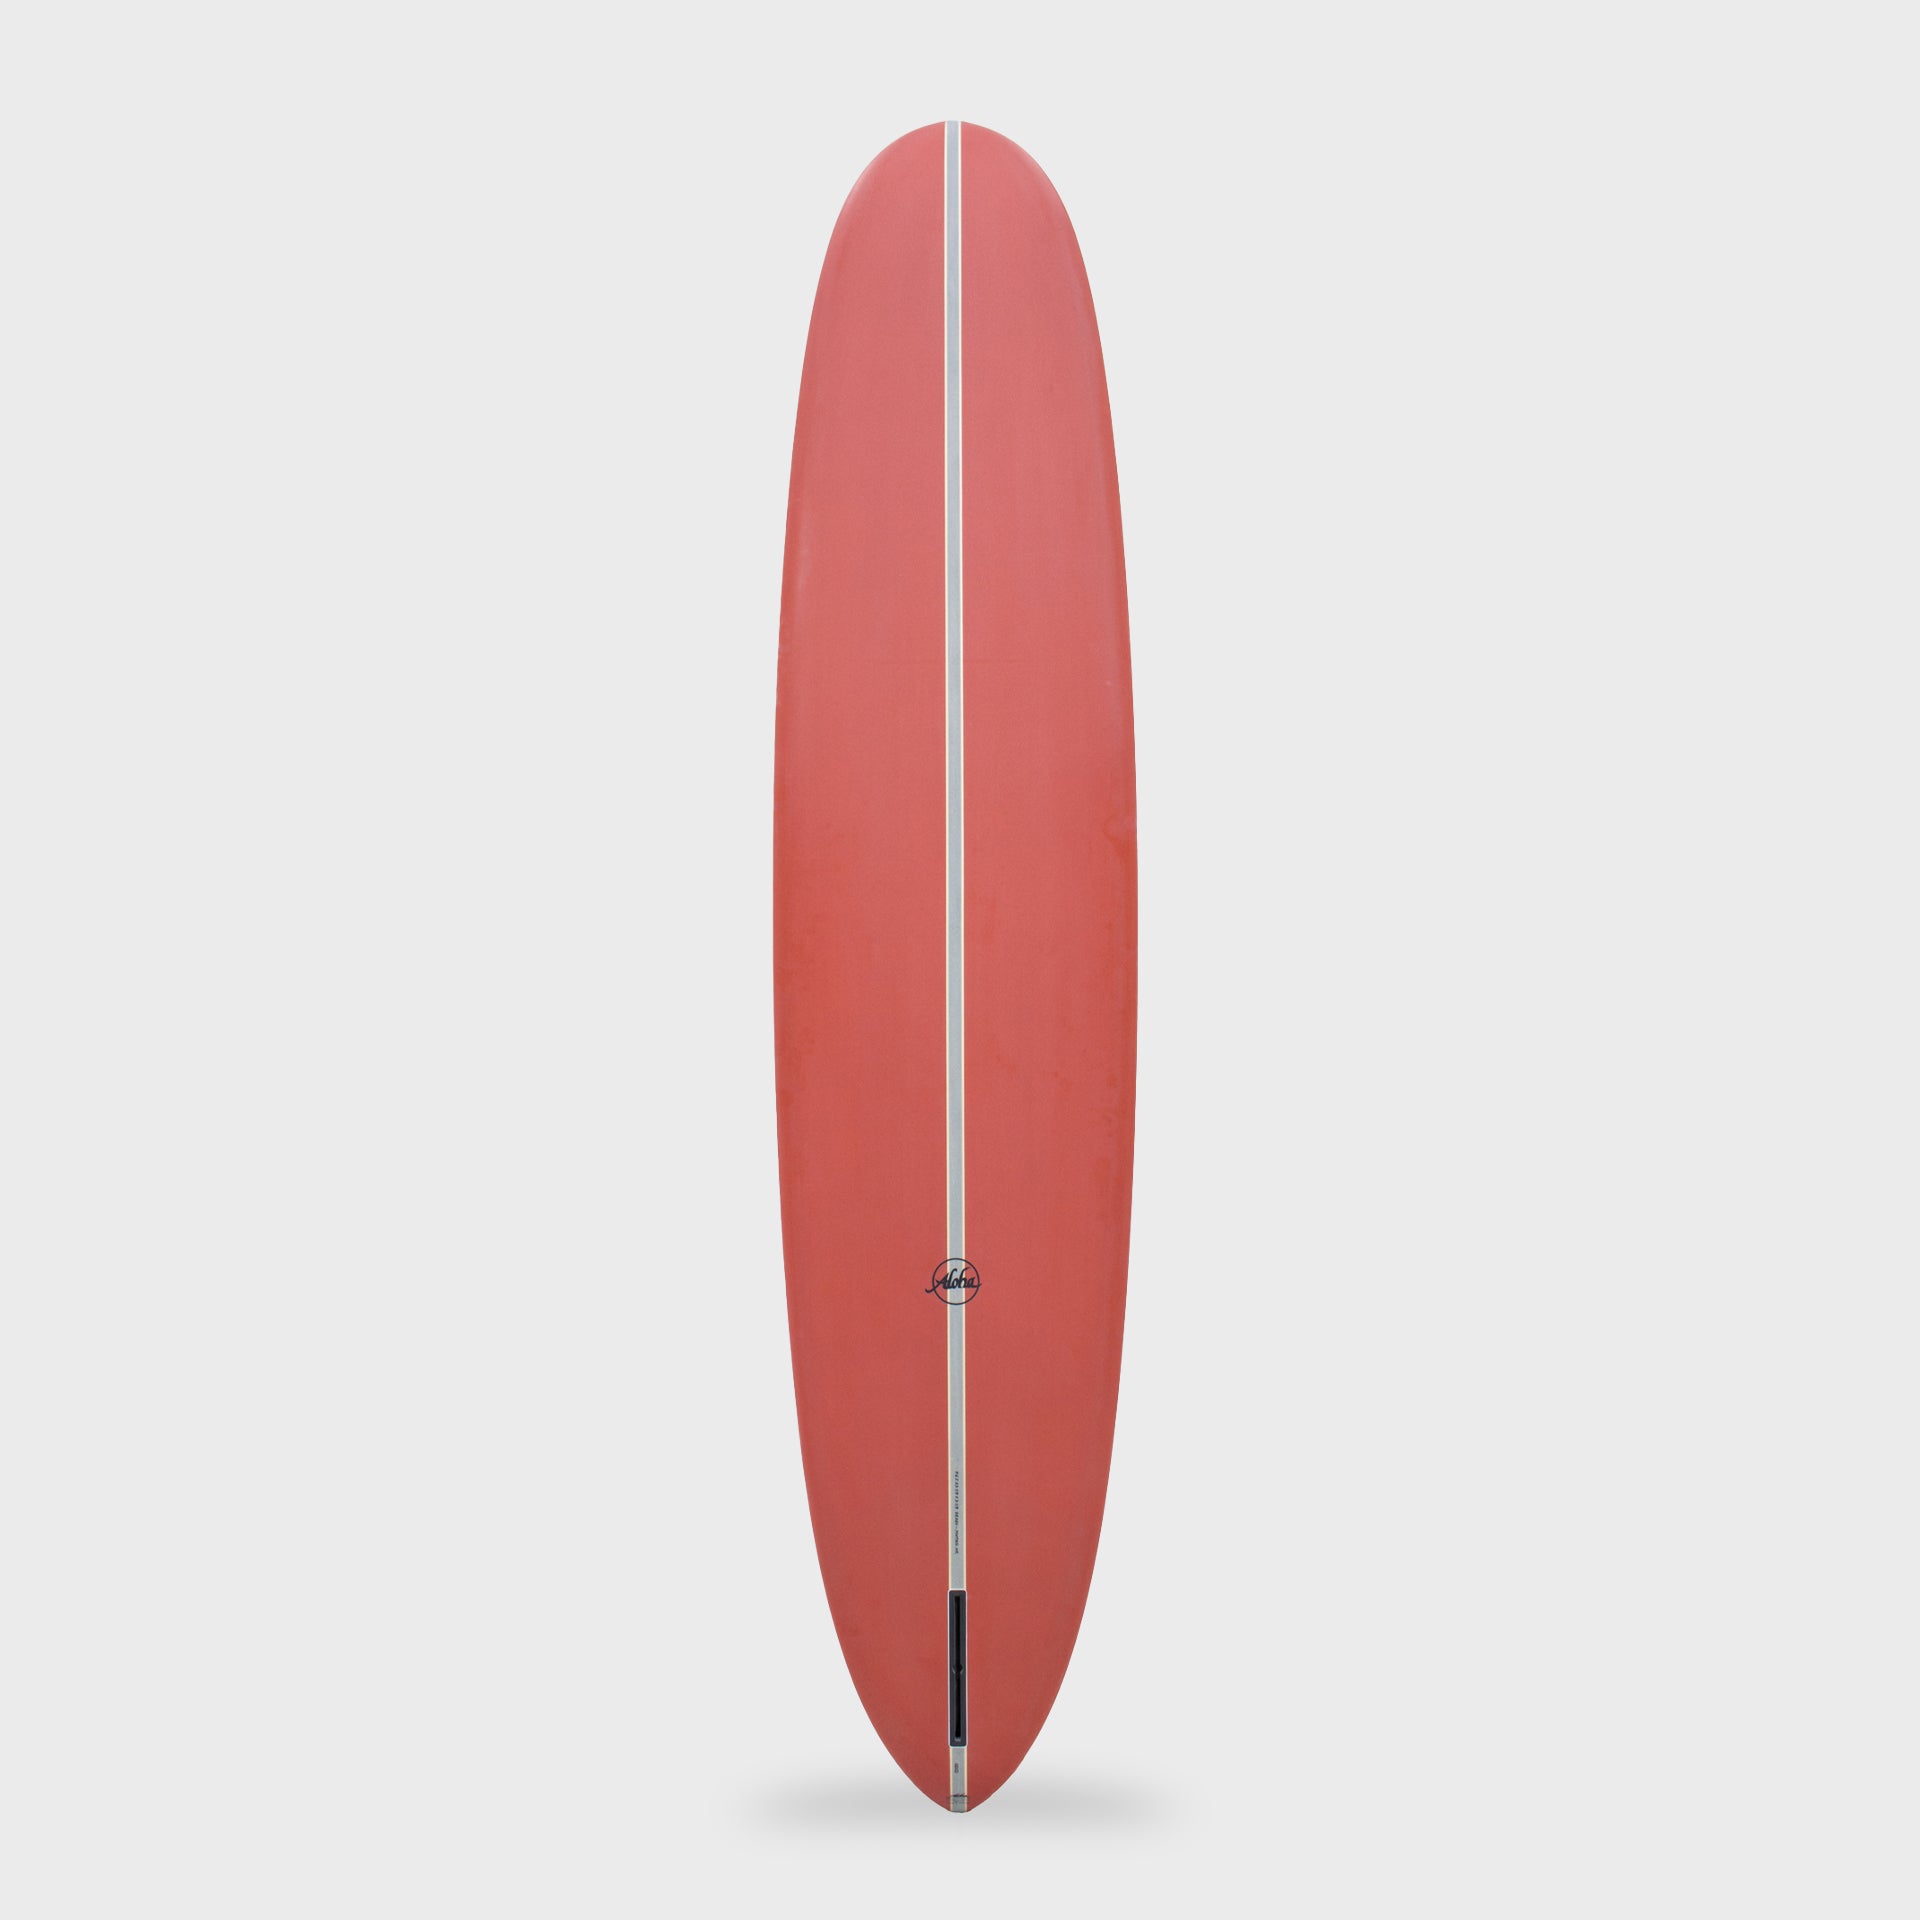 Pin Tail Nose Rider - PU-PVCP - Surfboard - 9'1, 9'4, 9'6 and 10'0 - Blood Red - ManGo Surfing